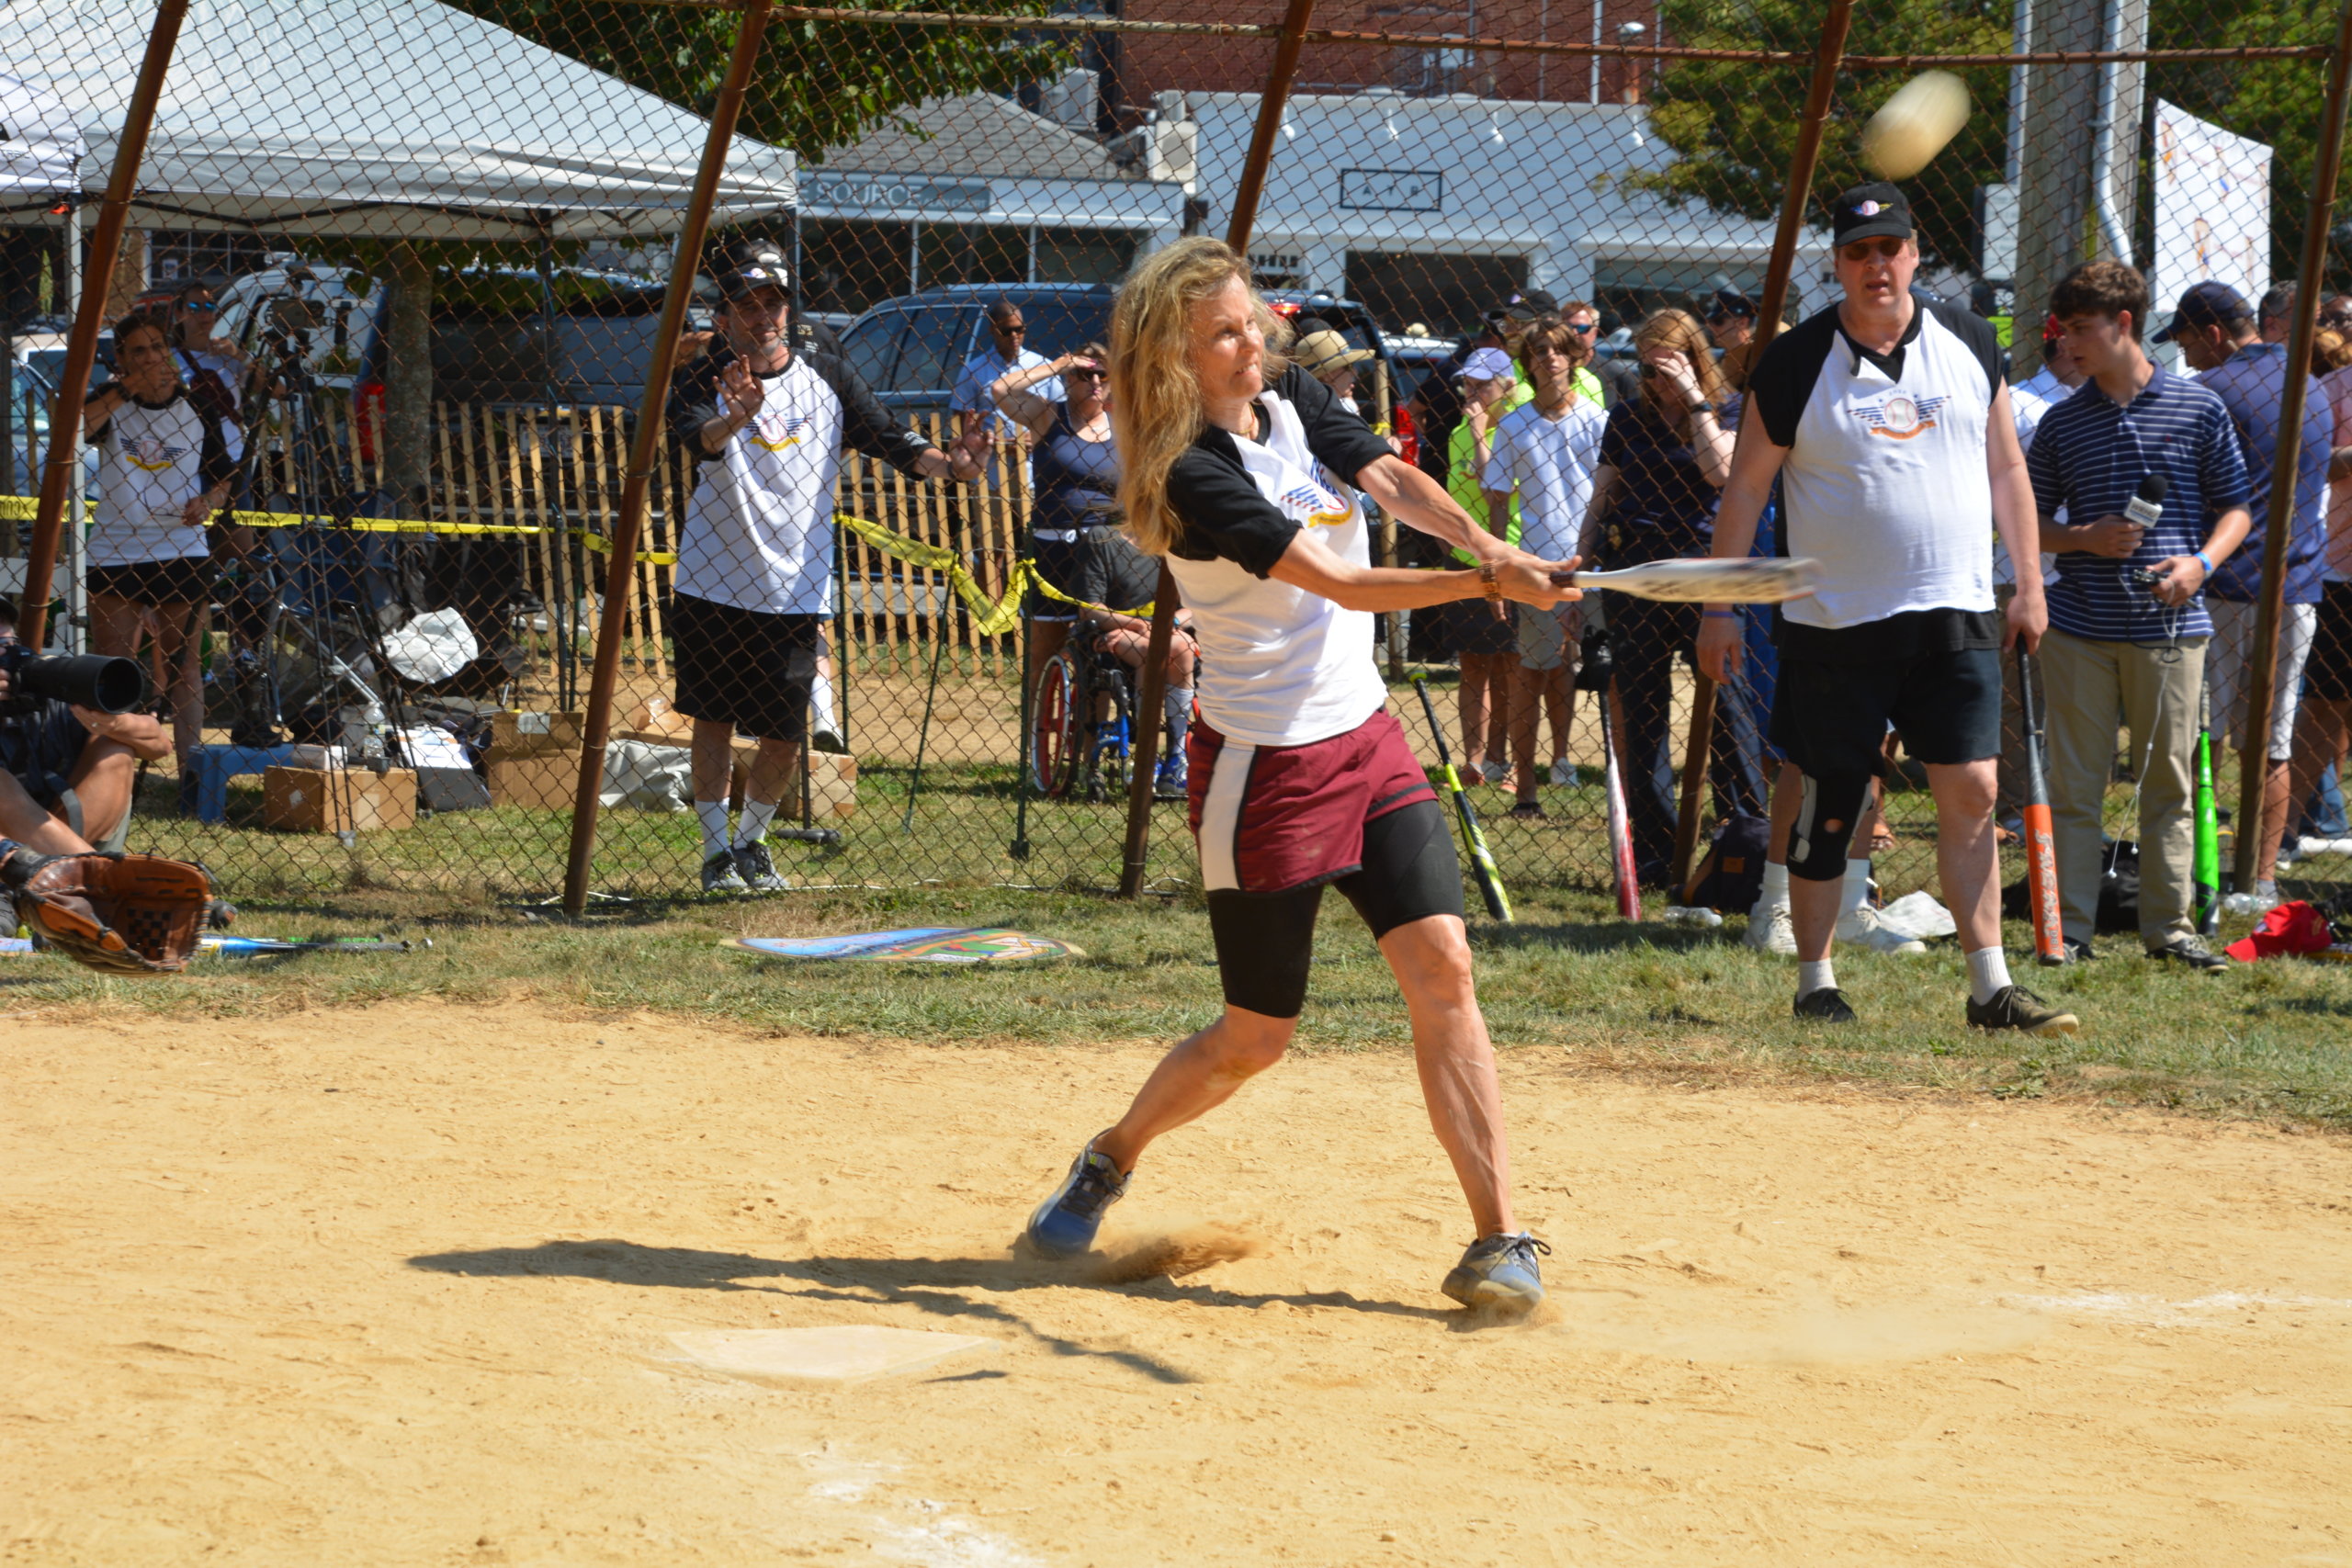 Lori Singer makes contact for the Artists at the 2002 Artists & Writers Game